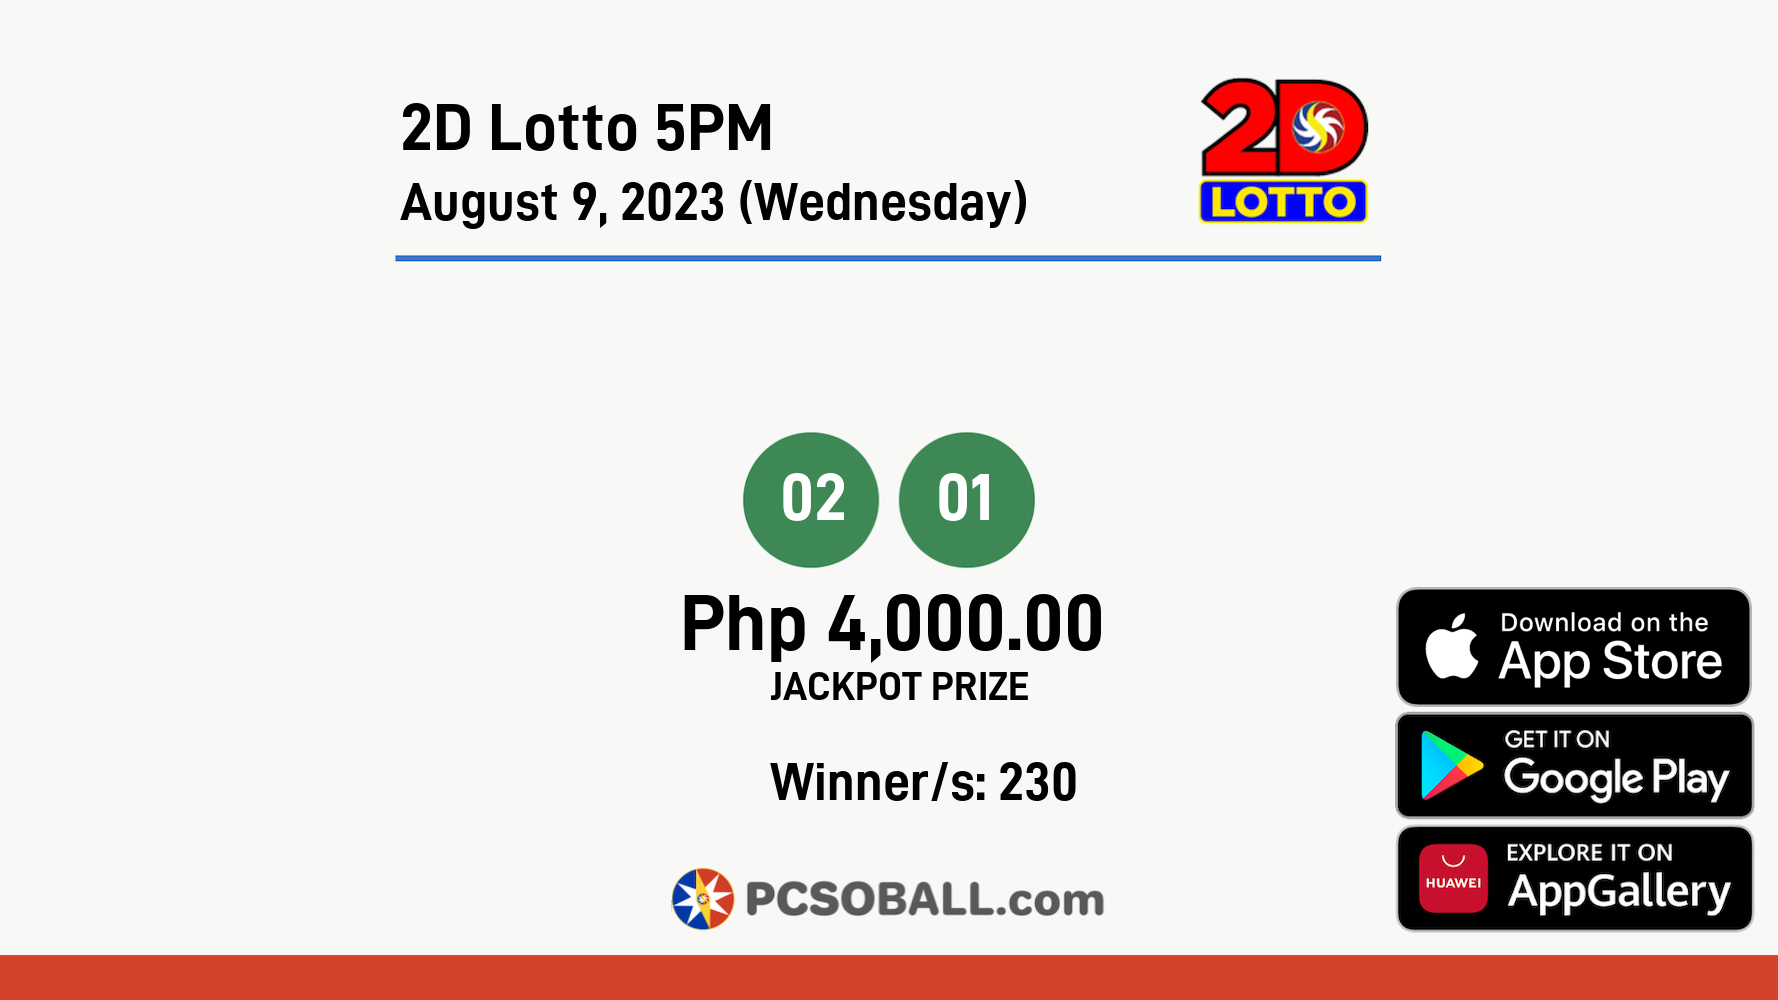 2D Lotto 5PM August 9, 2023 (Wednesday) Result